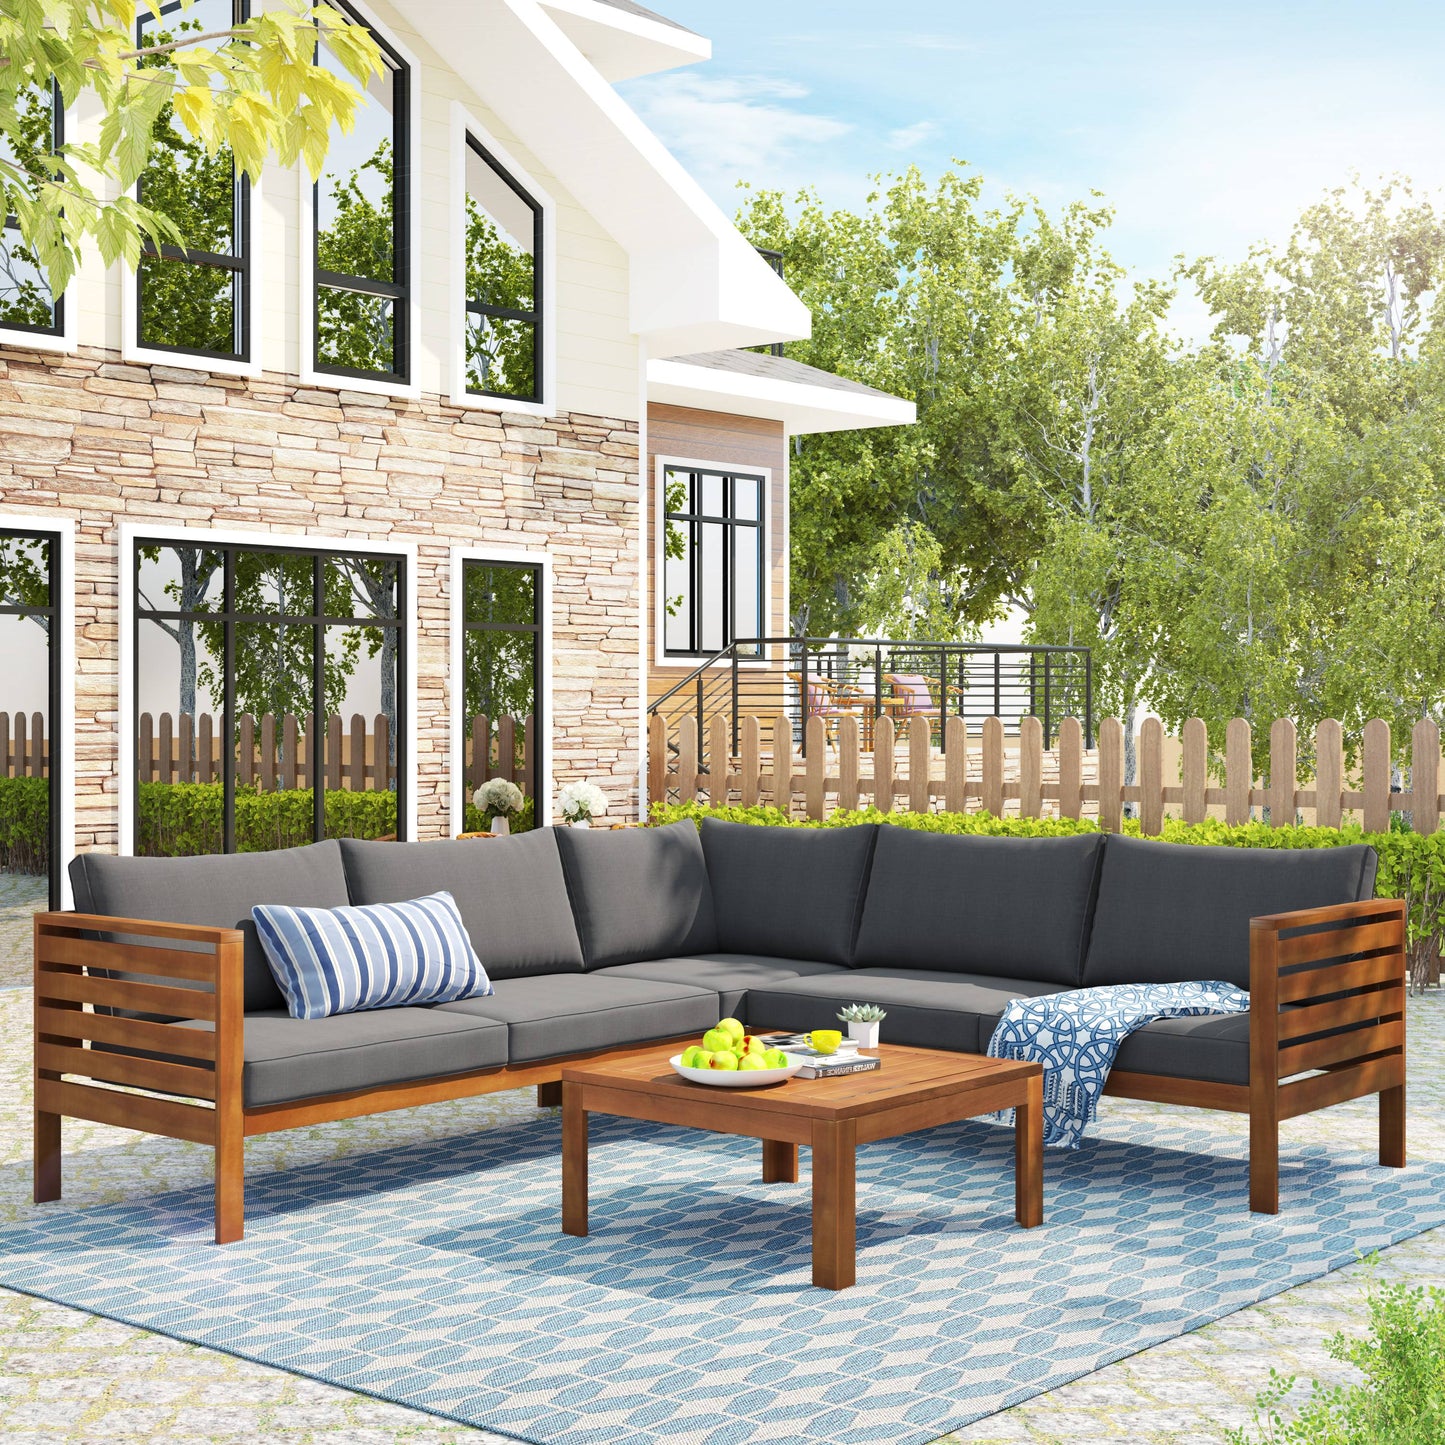 Outdoor Sofa Chairs Set, SYNGAR Patio Wood Furniture Set with Gray Cushions, 4 Piece Conversation Sofas with Two-Person Sofas, Coffee Table, Corner Sofa, for Backyard, Poolside, Deck, Balcony, D7478